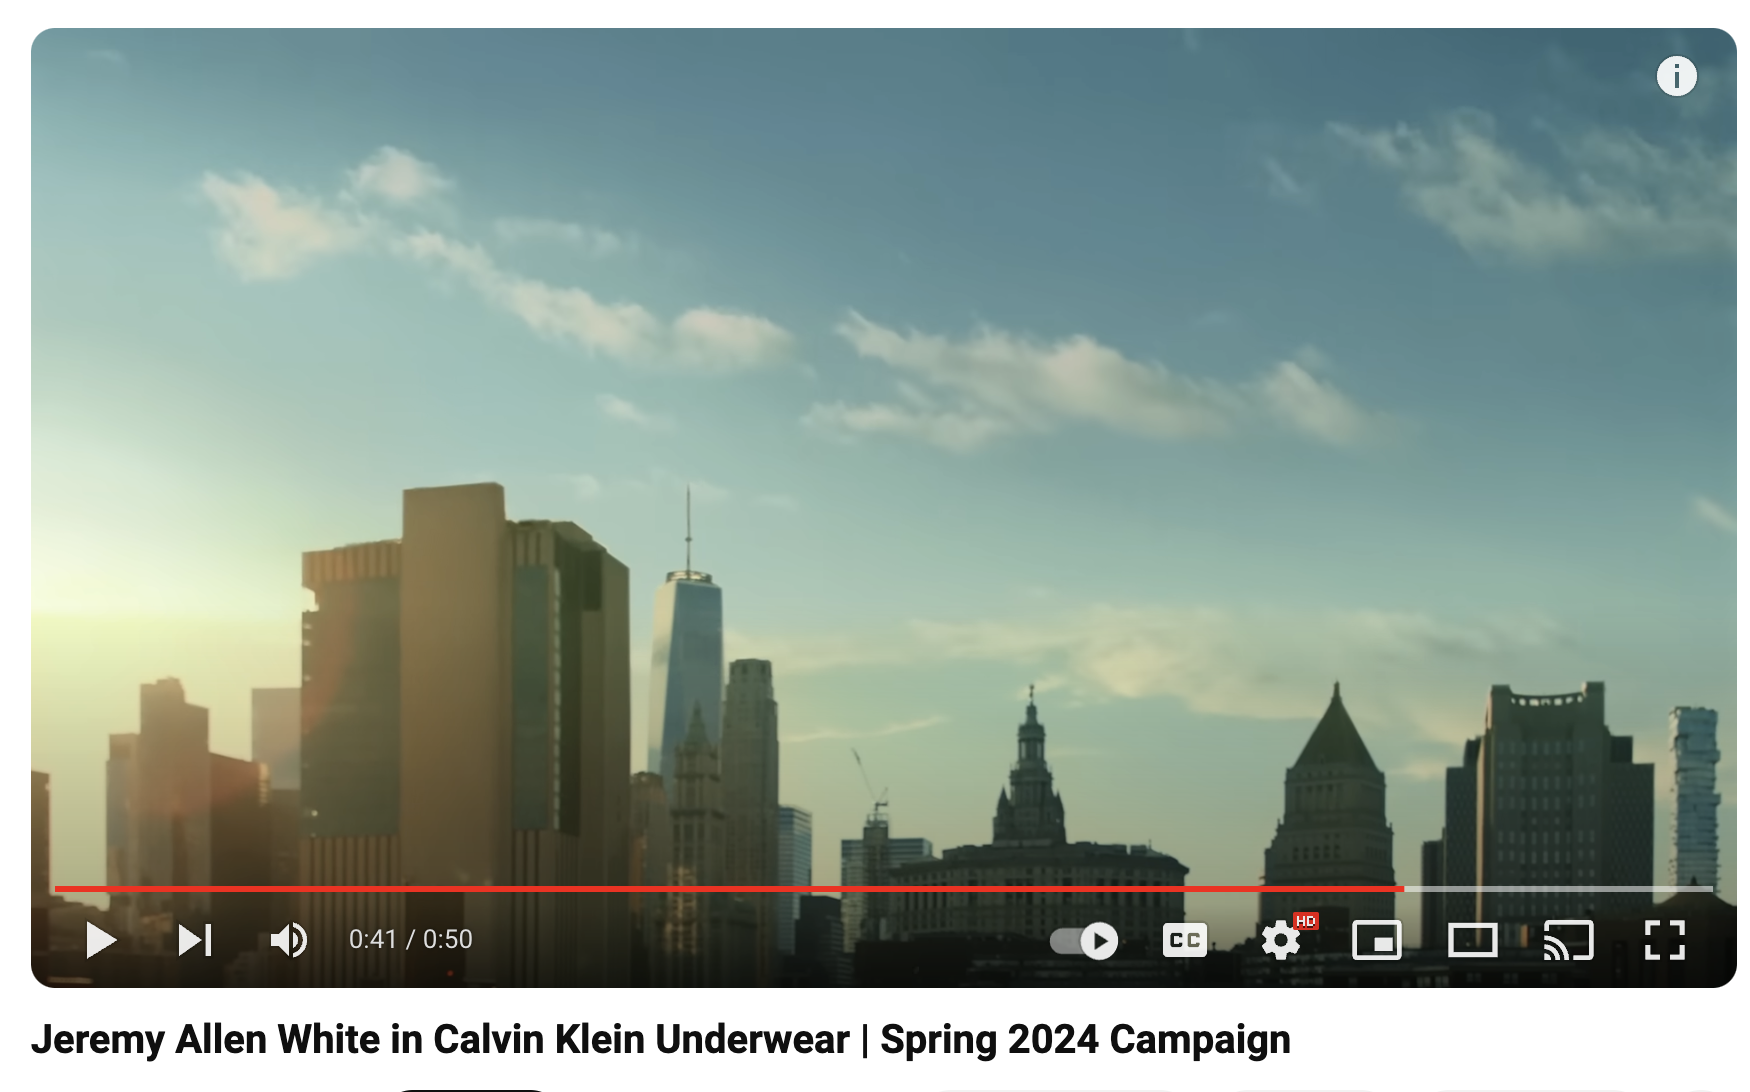 A screenshot of the Calvin Klein YouTube video featuring Jeremy Allen White. In the video, the actor can be seen strolling the streets of New York before ascending the stairs of a building to get to the roof. On the roof, he performs various physical feats in Calvin Klein underwear.